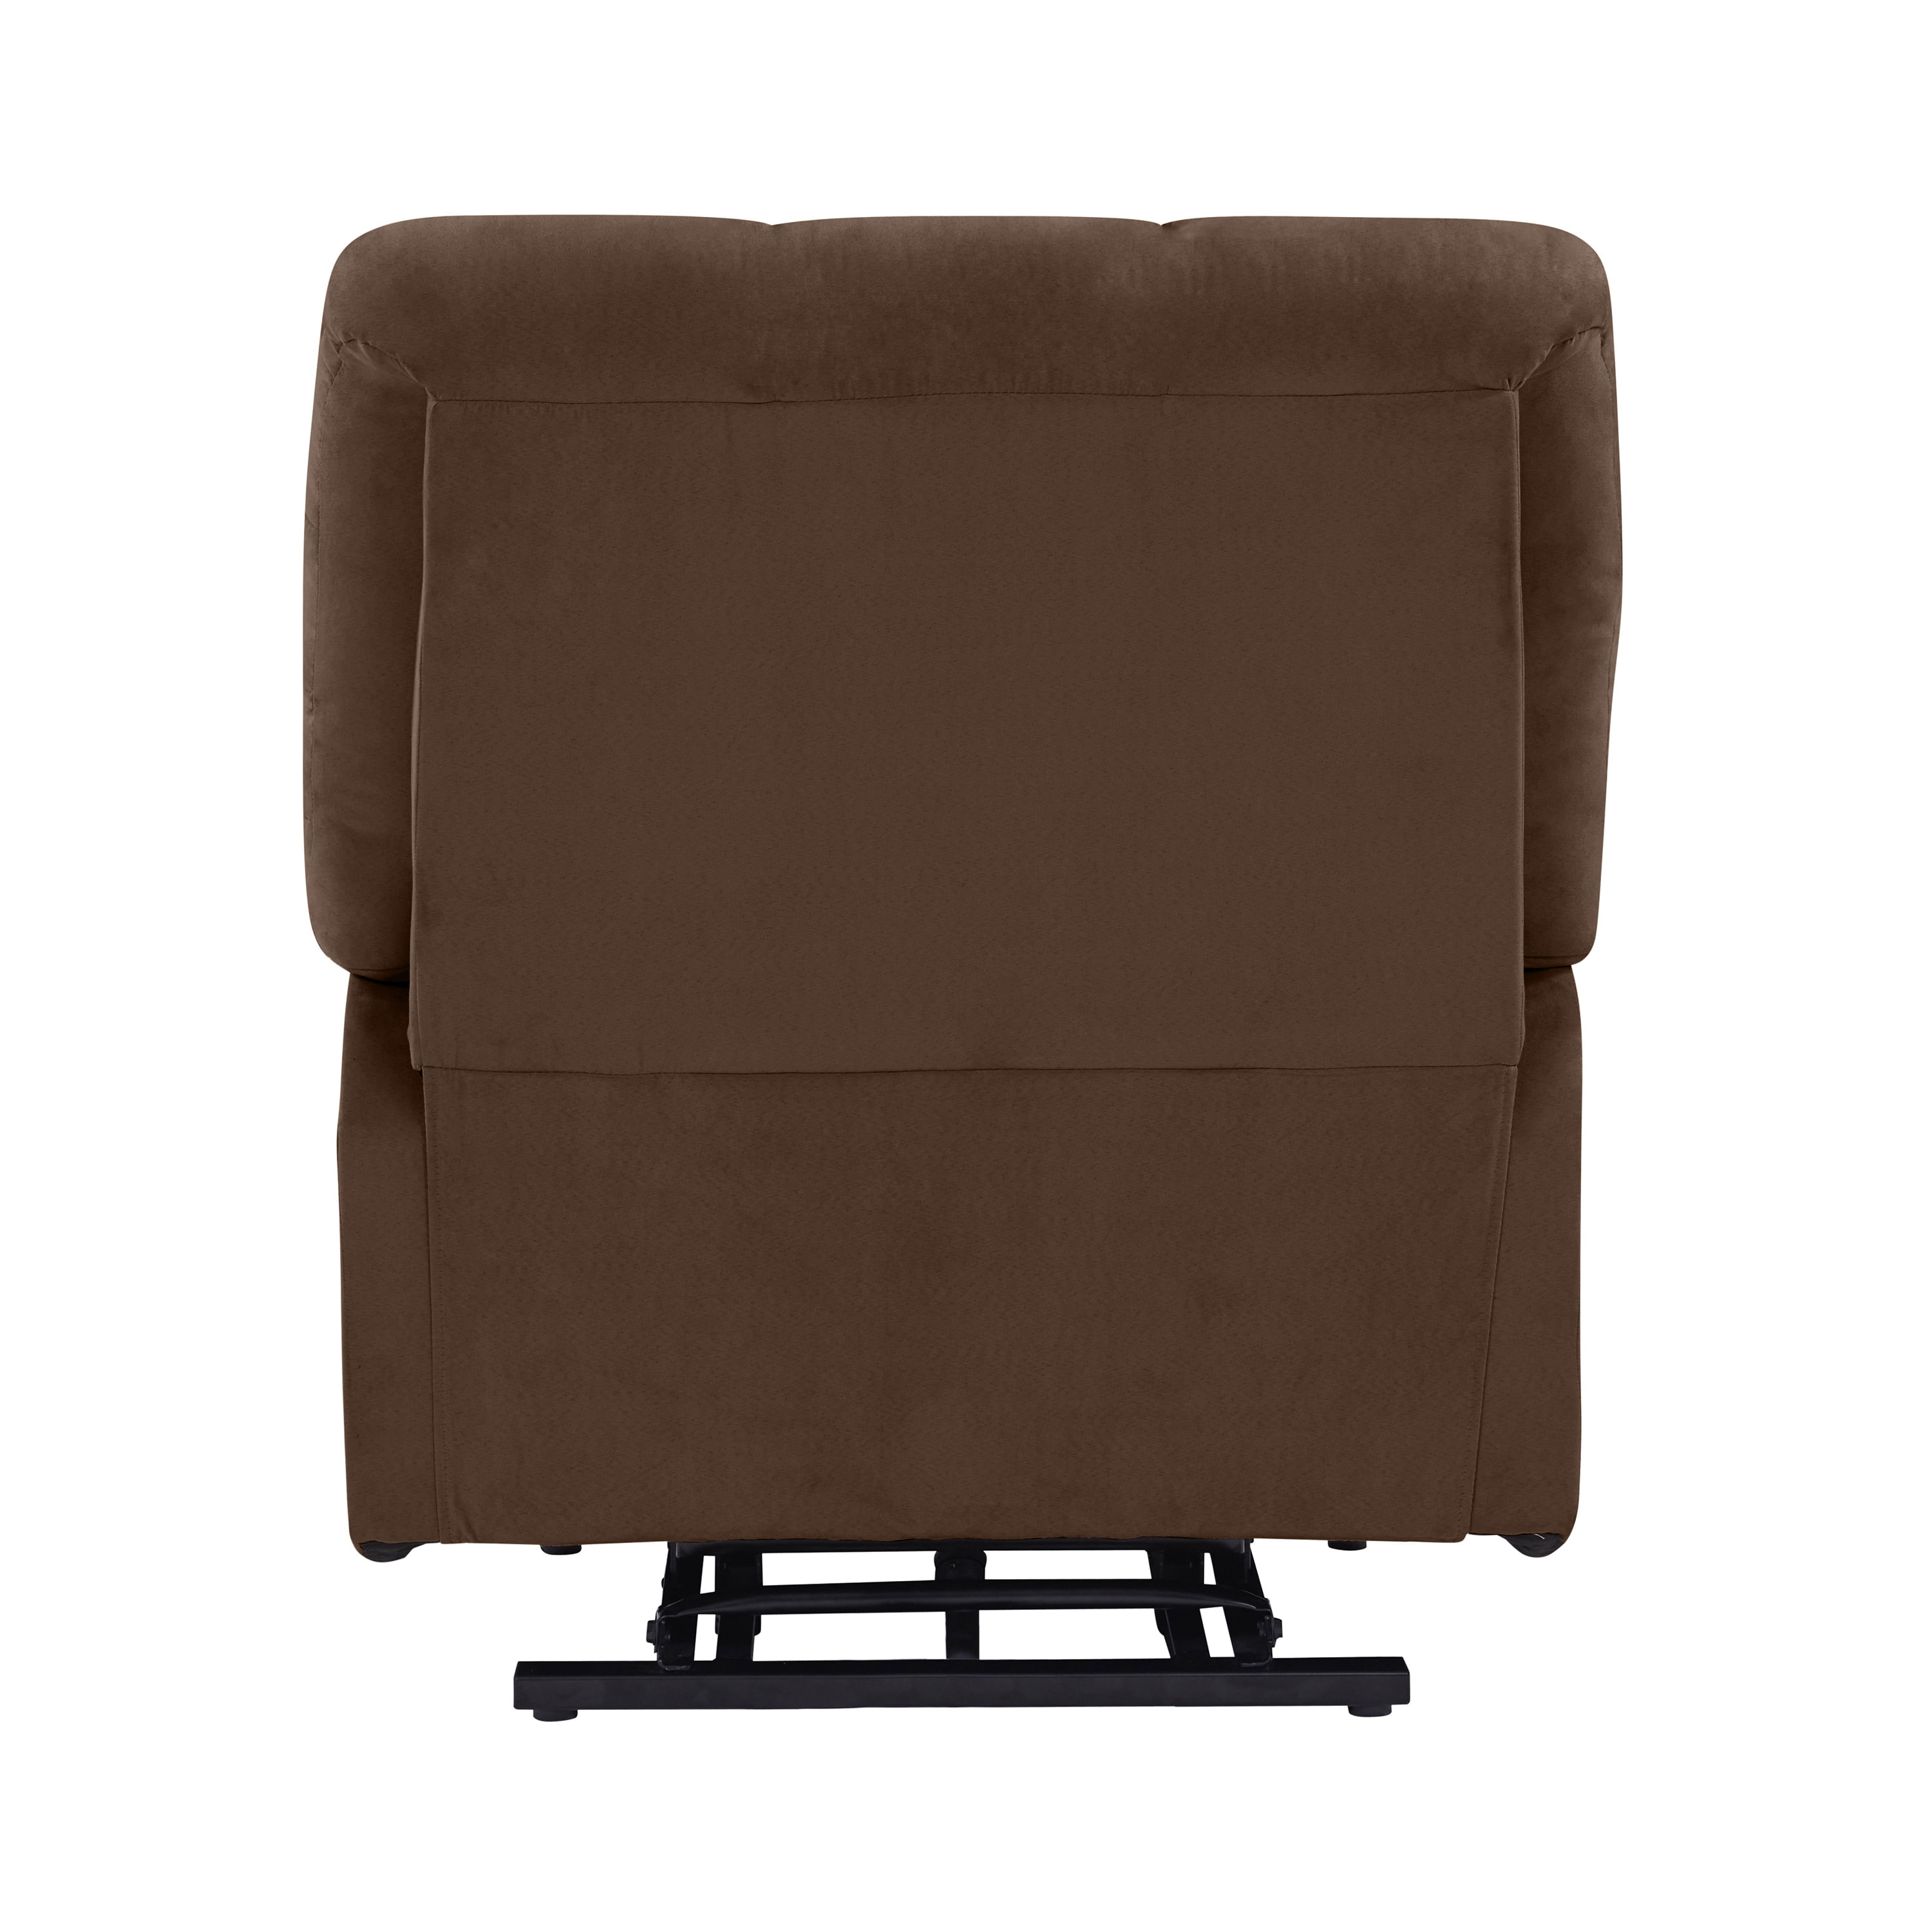 Huguley Power Lay Flat Recliner with Extra Extension Foot Rest Wildon Home Body Fabric: Brown Polyester